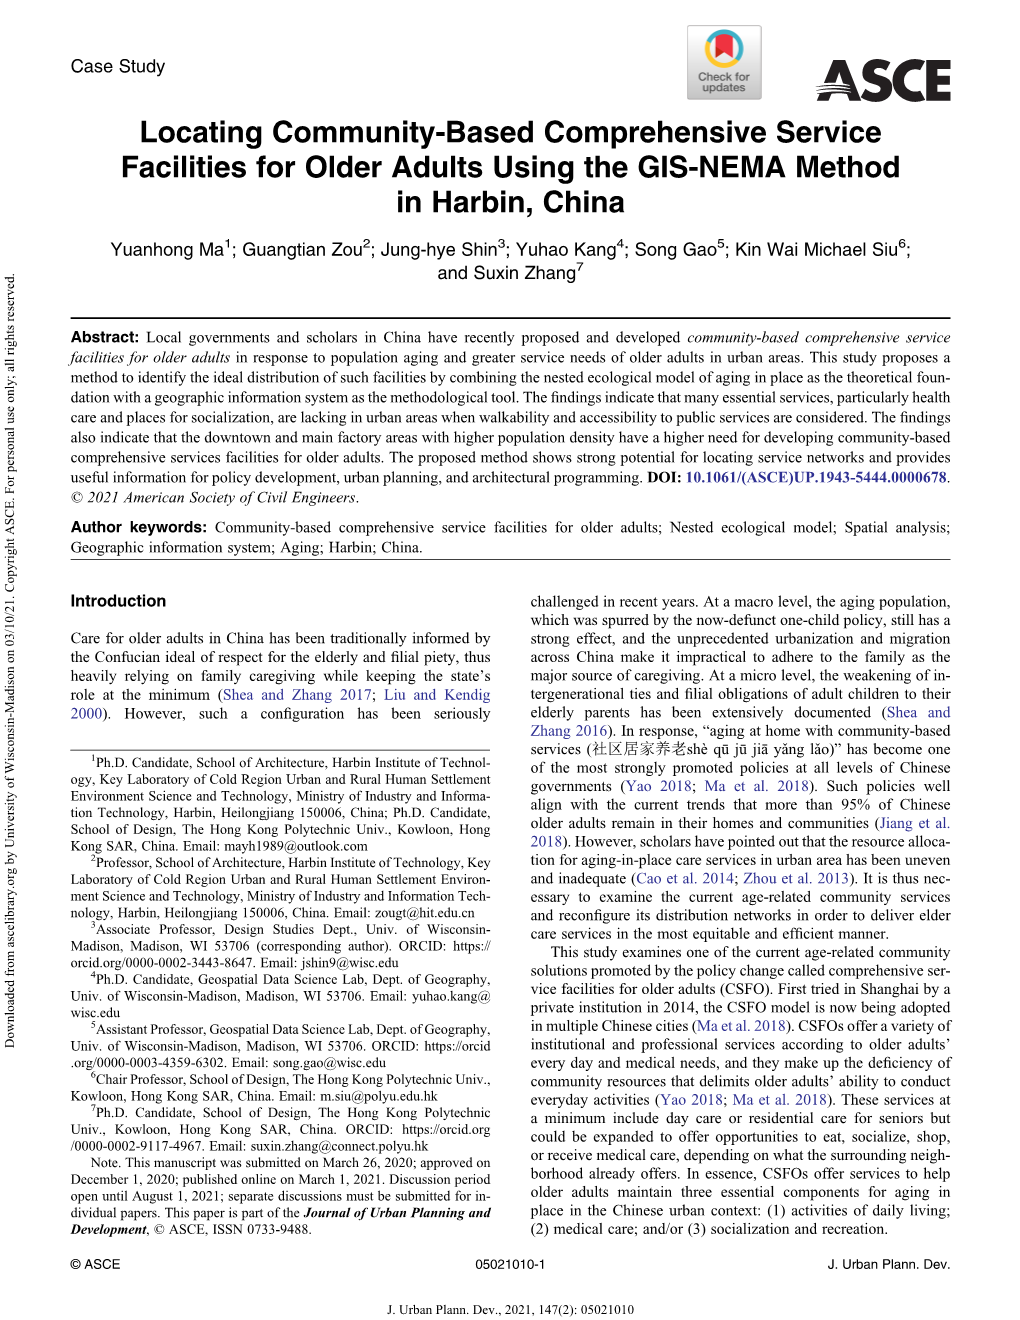 Locating Community-Based Comprehensive Service Facilities for Older Adults Using the GIS-NEMA Method in Harbin, China